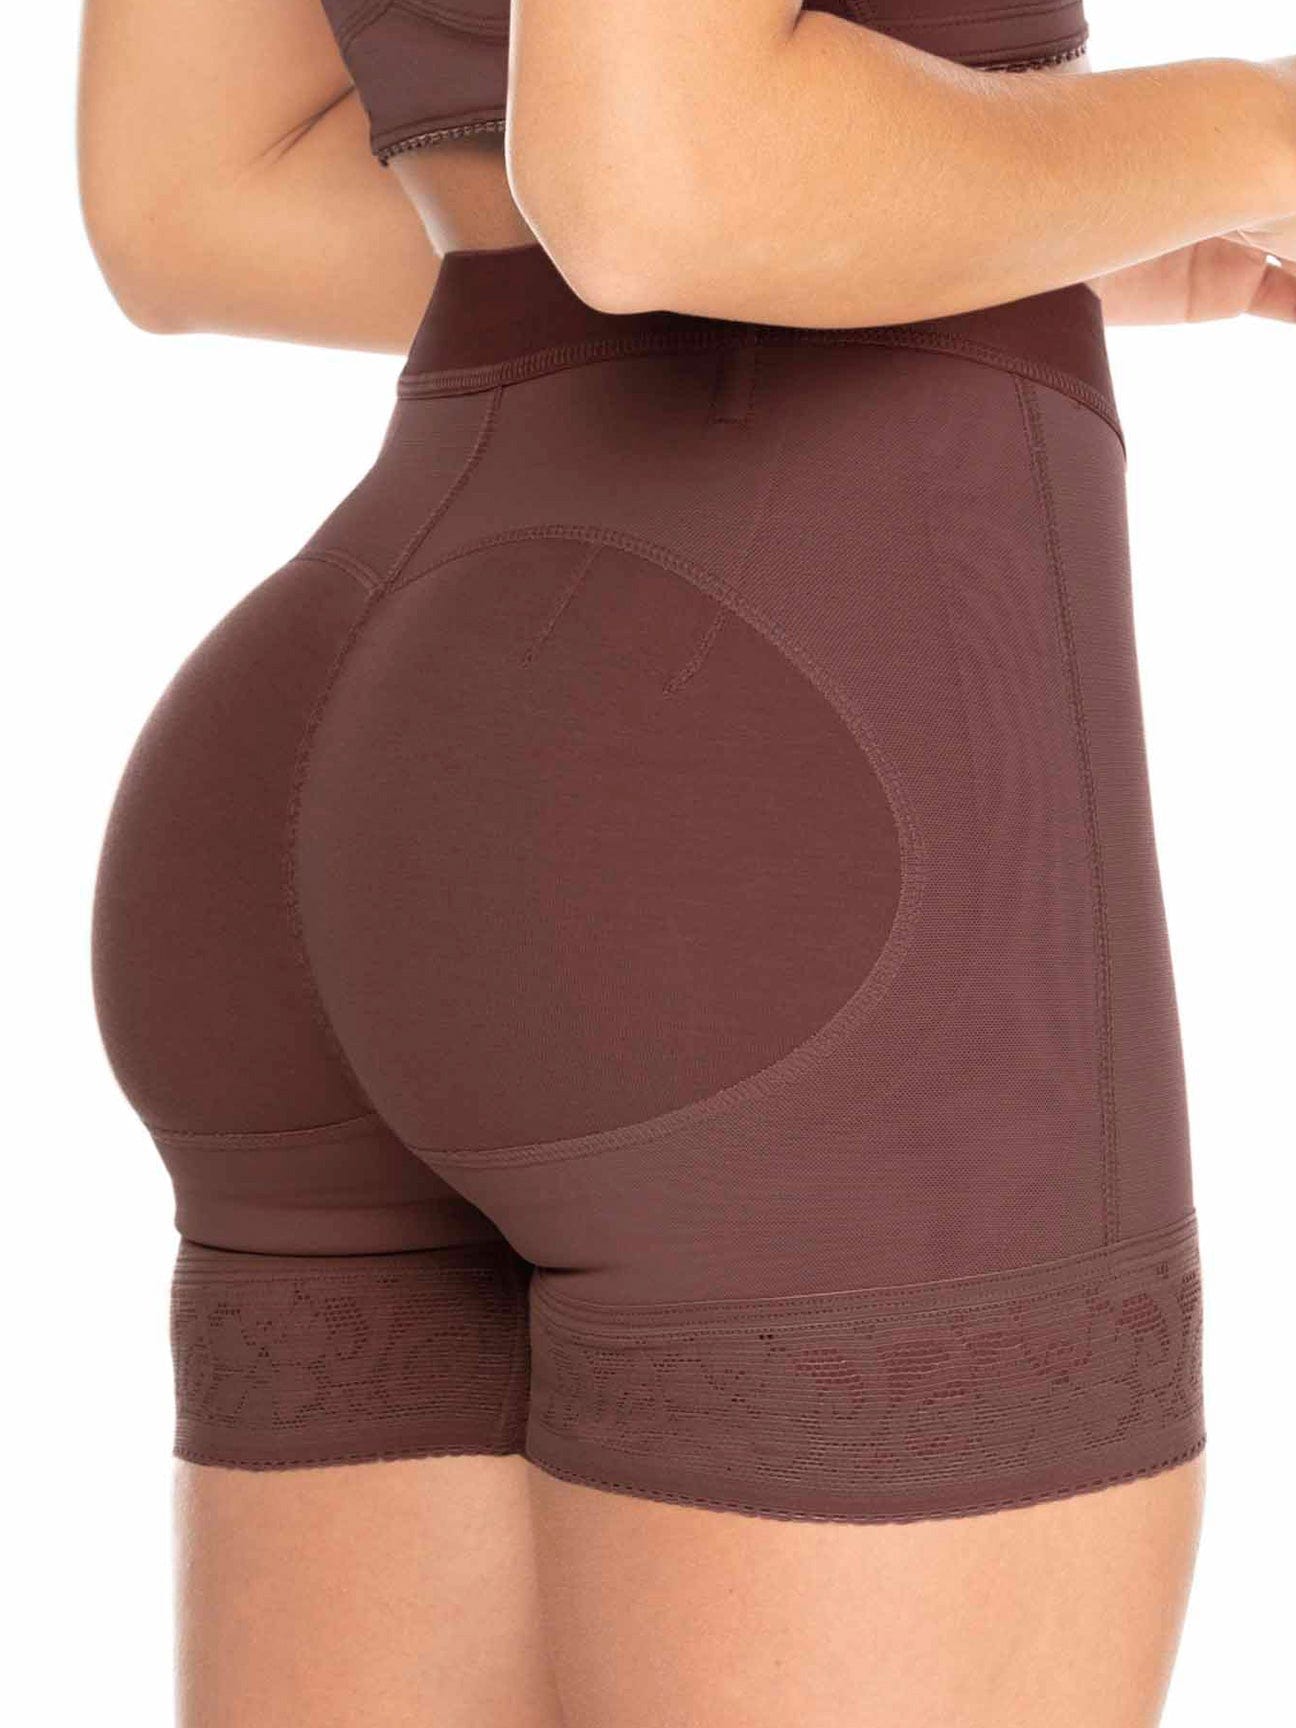 Lower back view of chocolate colored high waist powernet butt lifter.